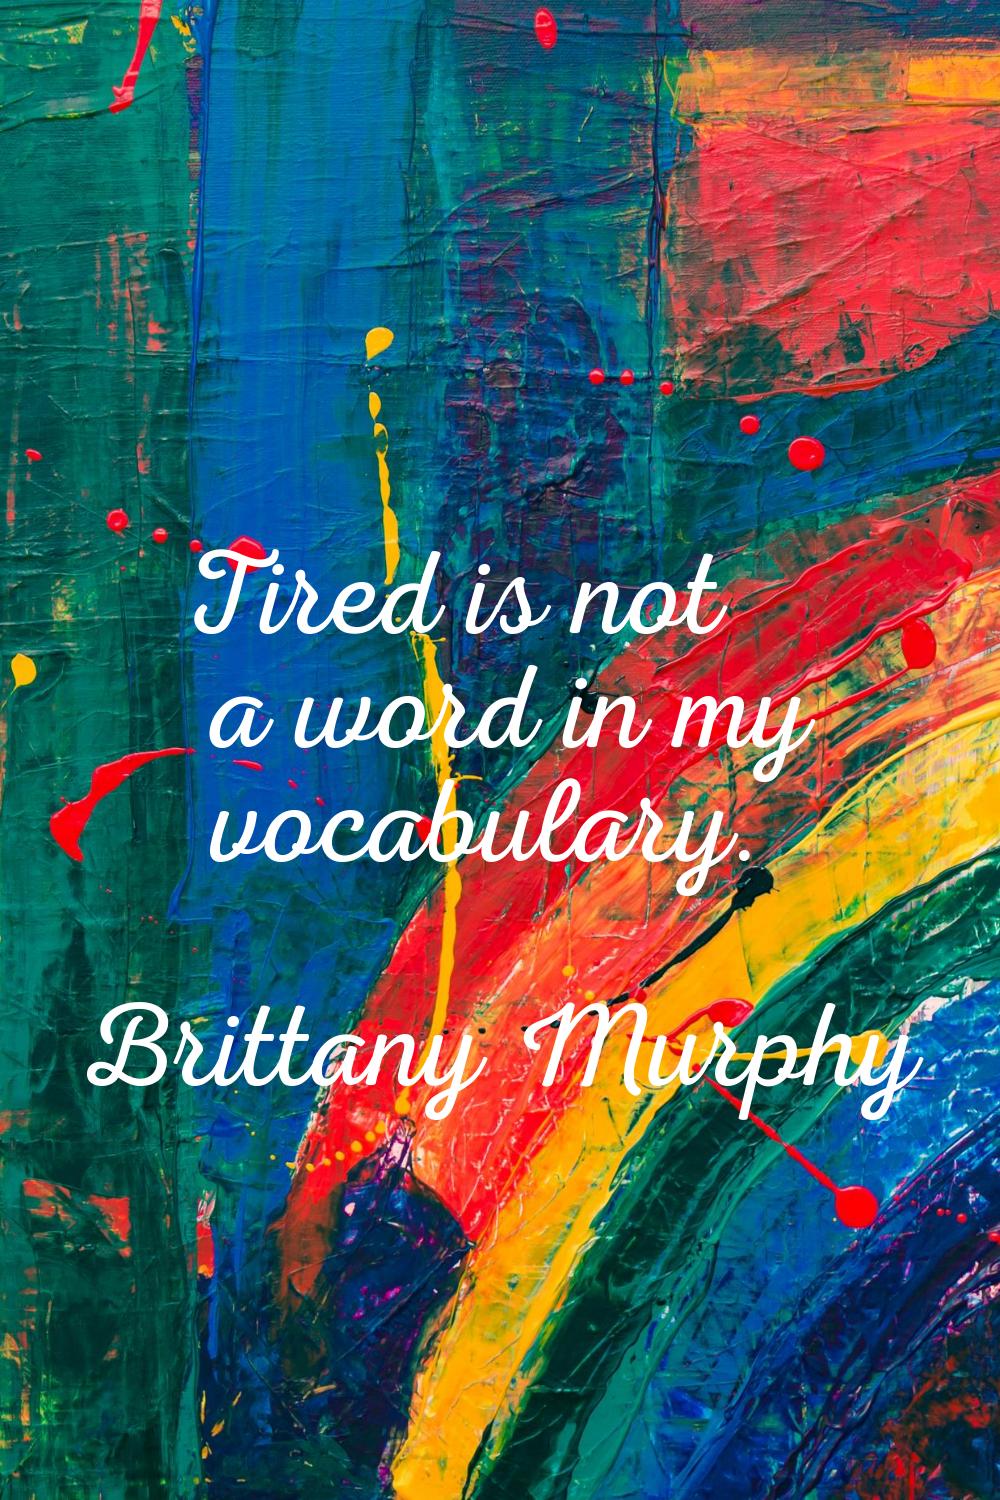 Tired is not a word in my vocabulary.